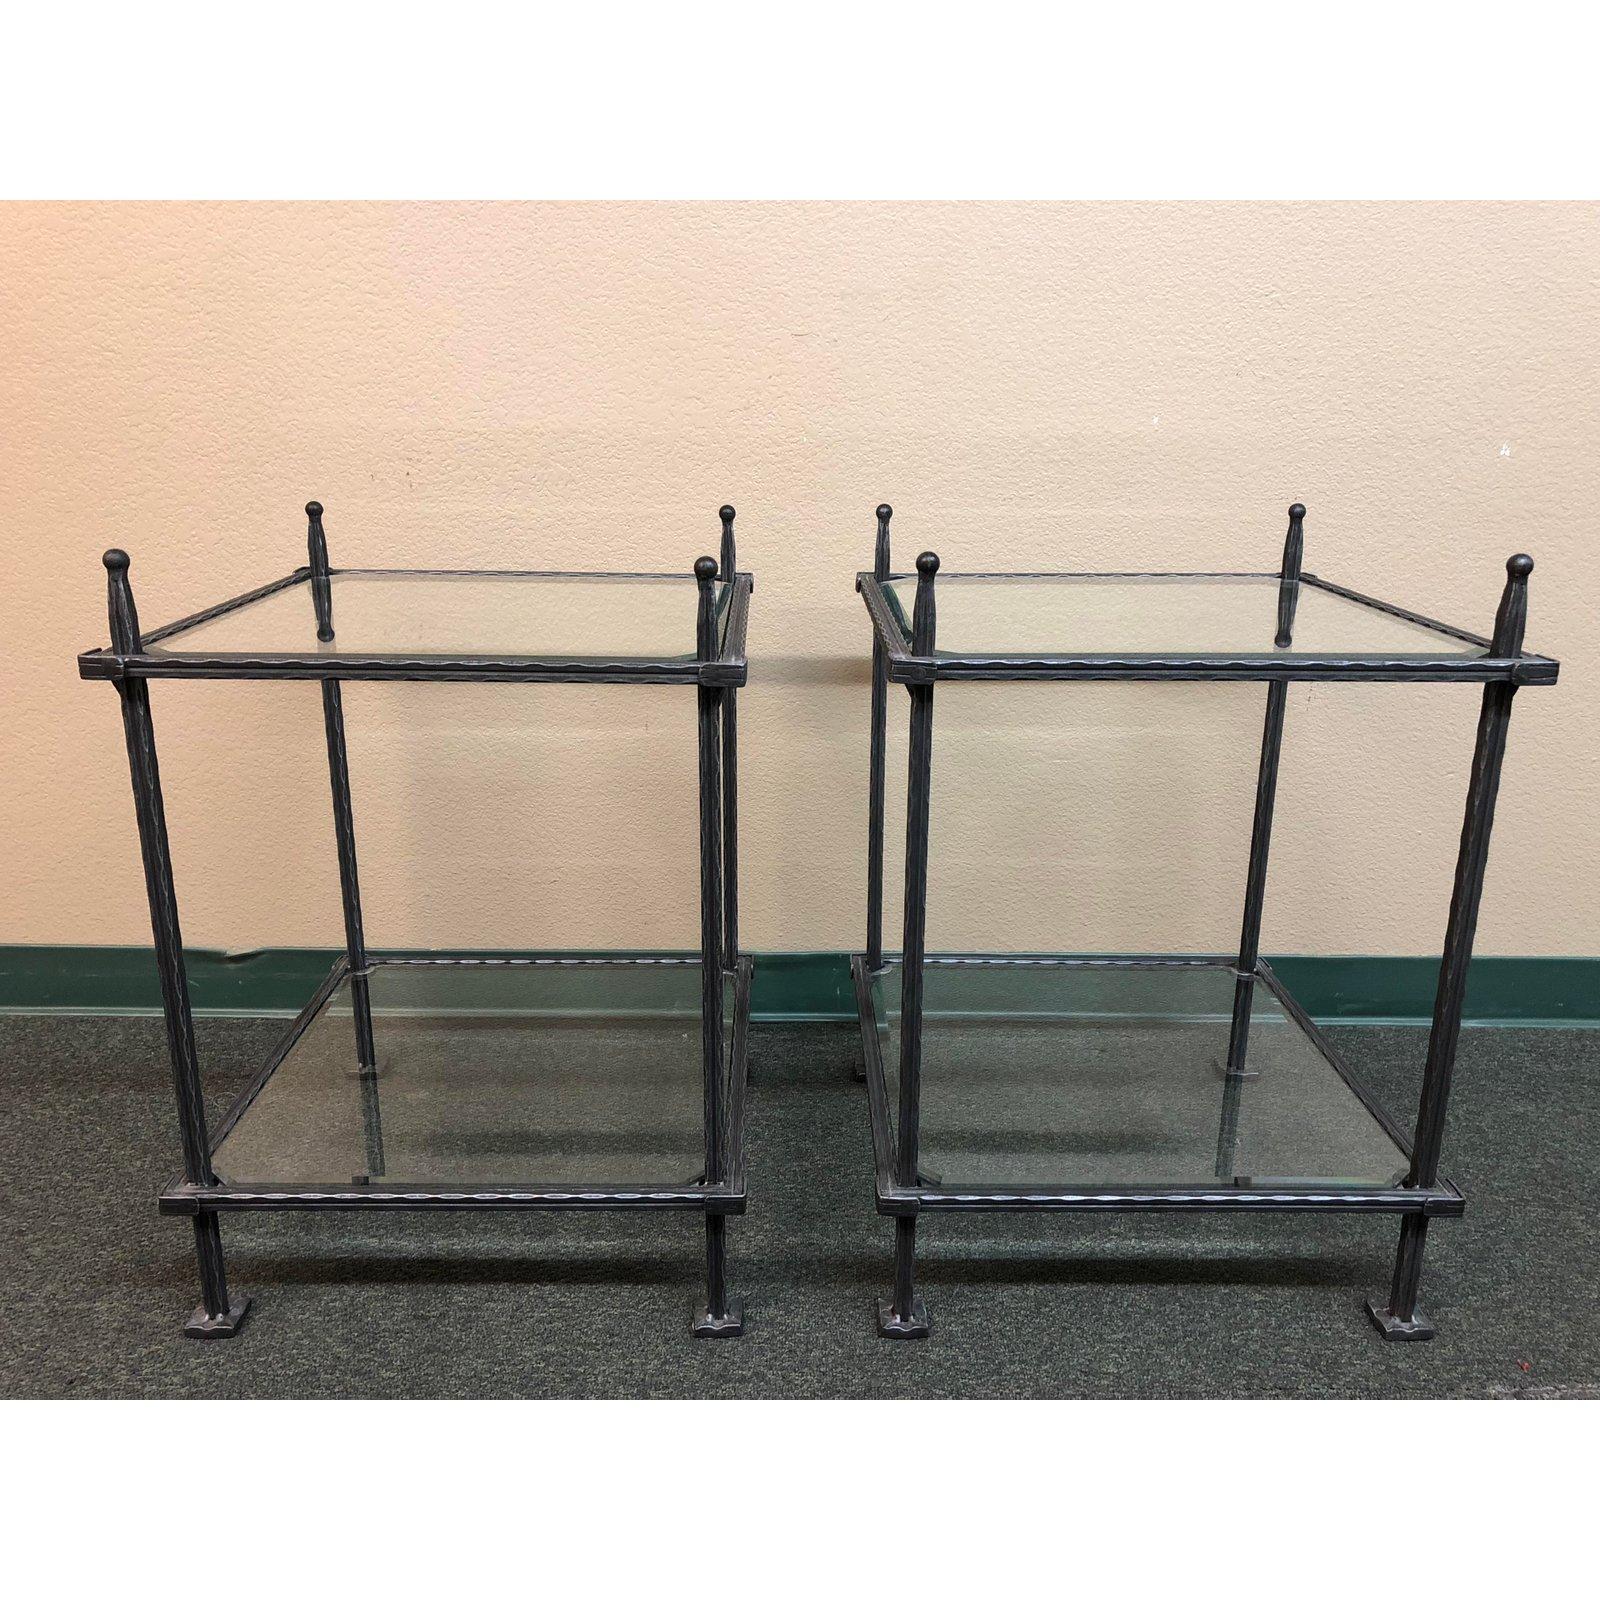 A pair of wrought iron and beveled glass tables by Claudio Rayes. Designed in Italy and crafted in Buenos Aires. The strong buy delicate pair have been created in a romantic rustic style, by heating and hammering the iron into an original design by